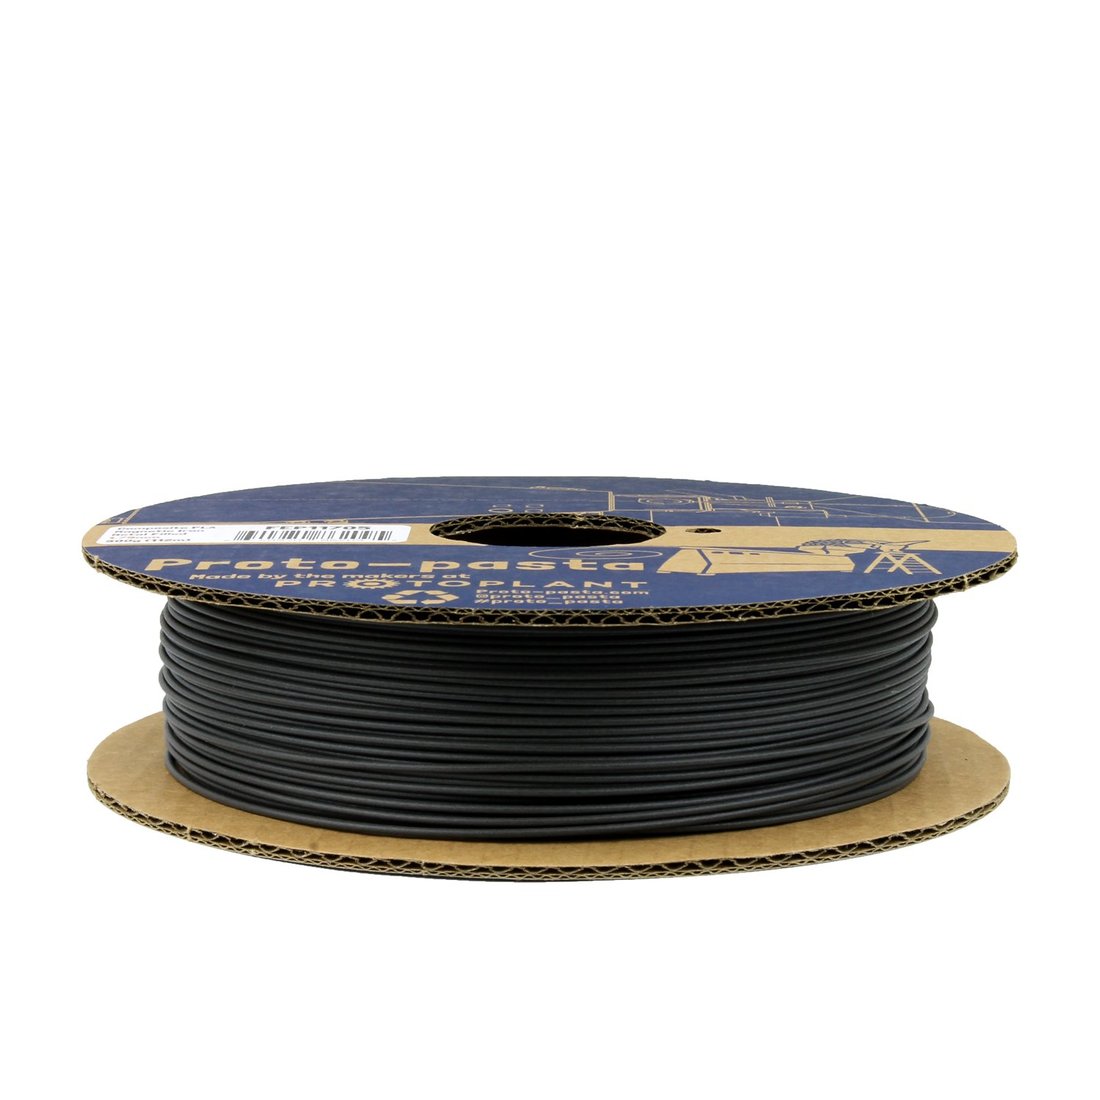 Iron-filled Metal Composite PLA, 3